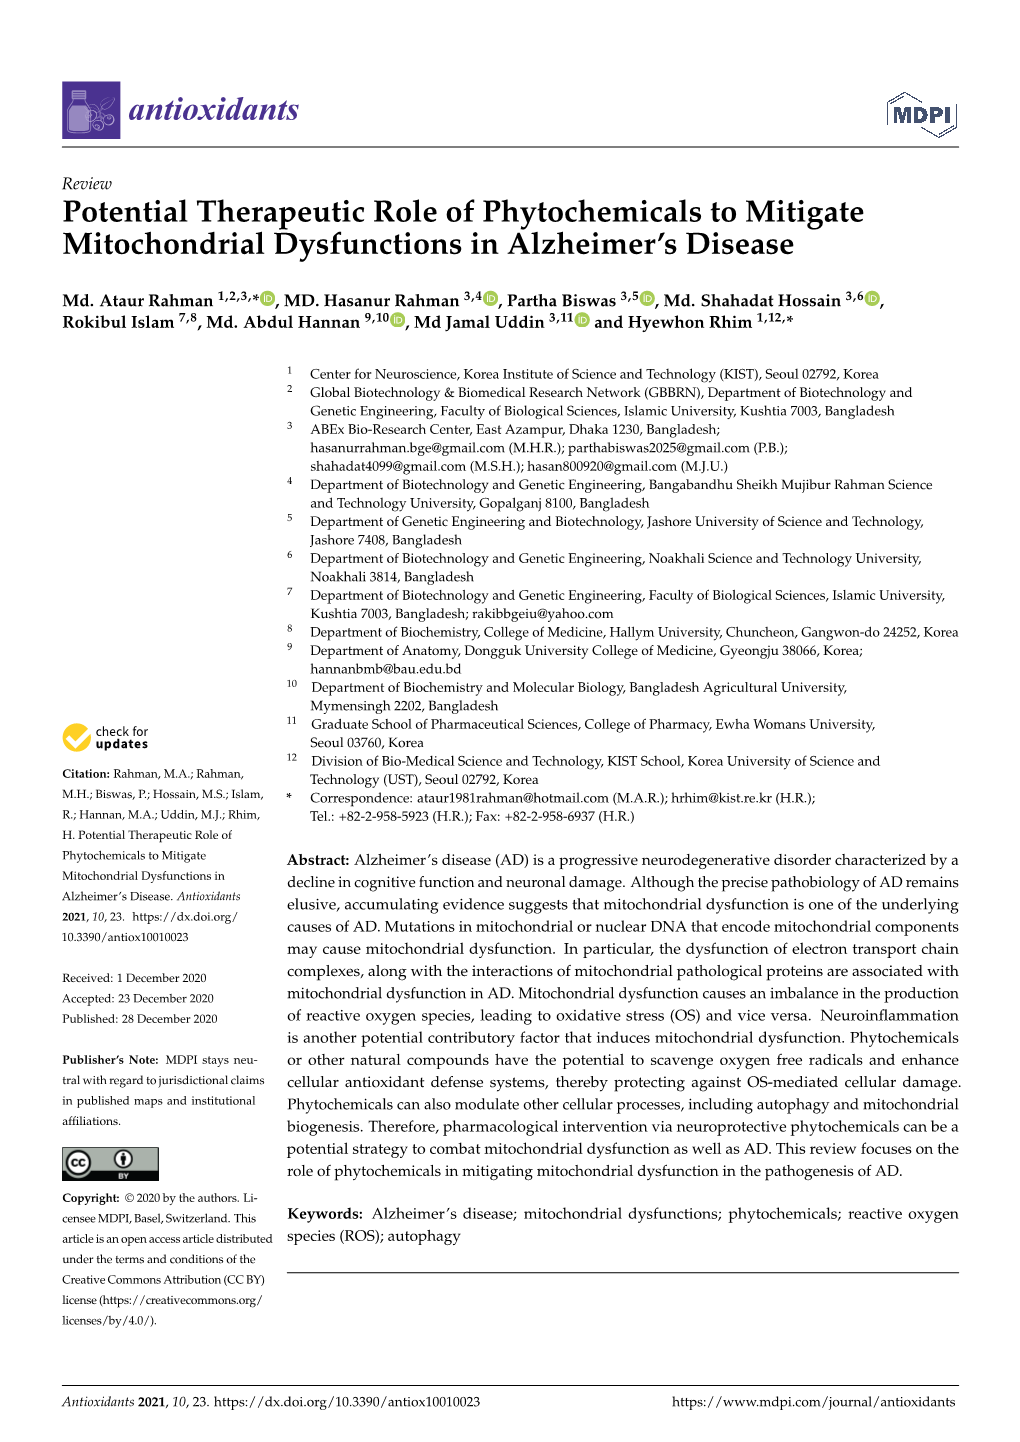 Potential Therapeutic Role of Phytochemicals to Mitigate Mitochondrial Dysfunctions in Alzheimer’S Disease